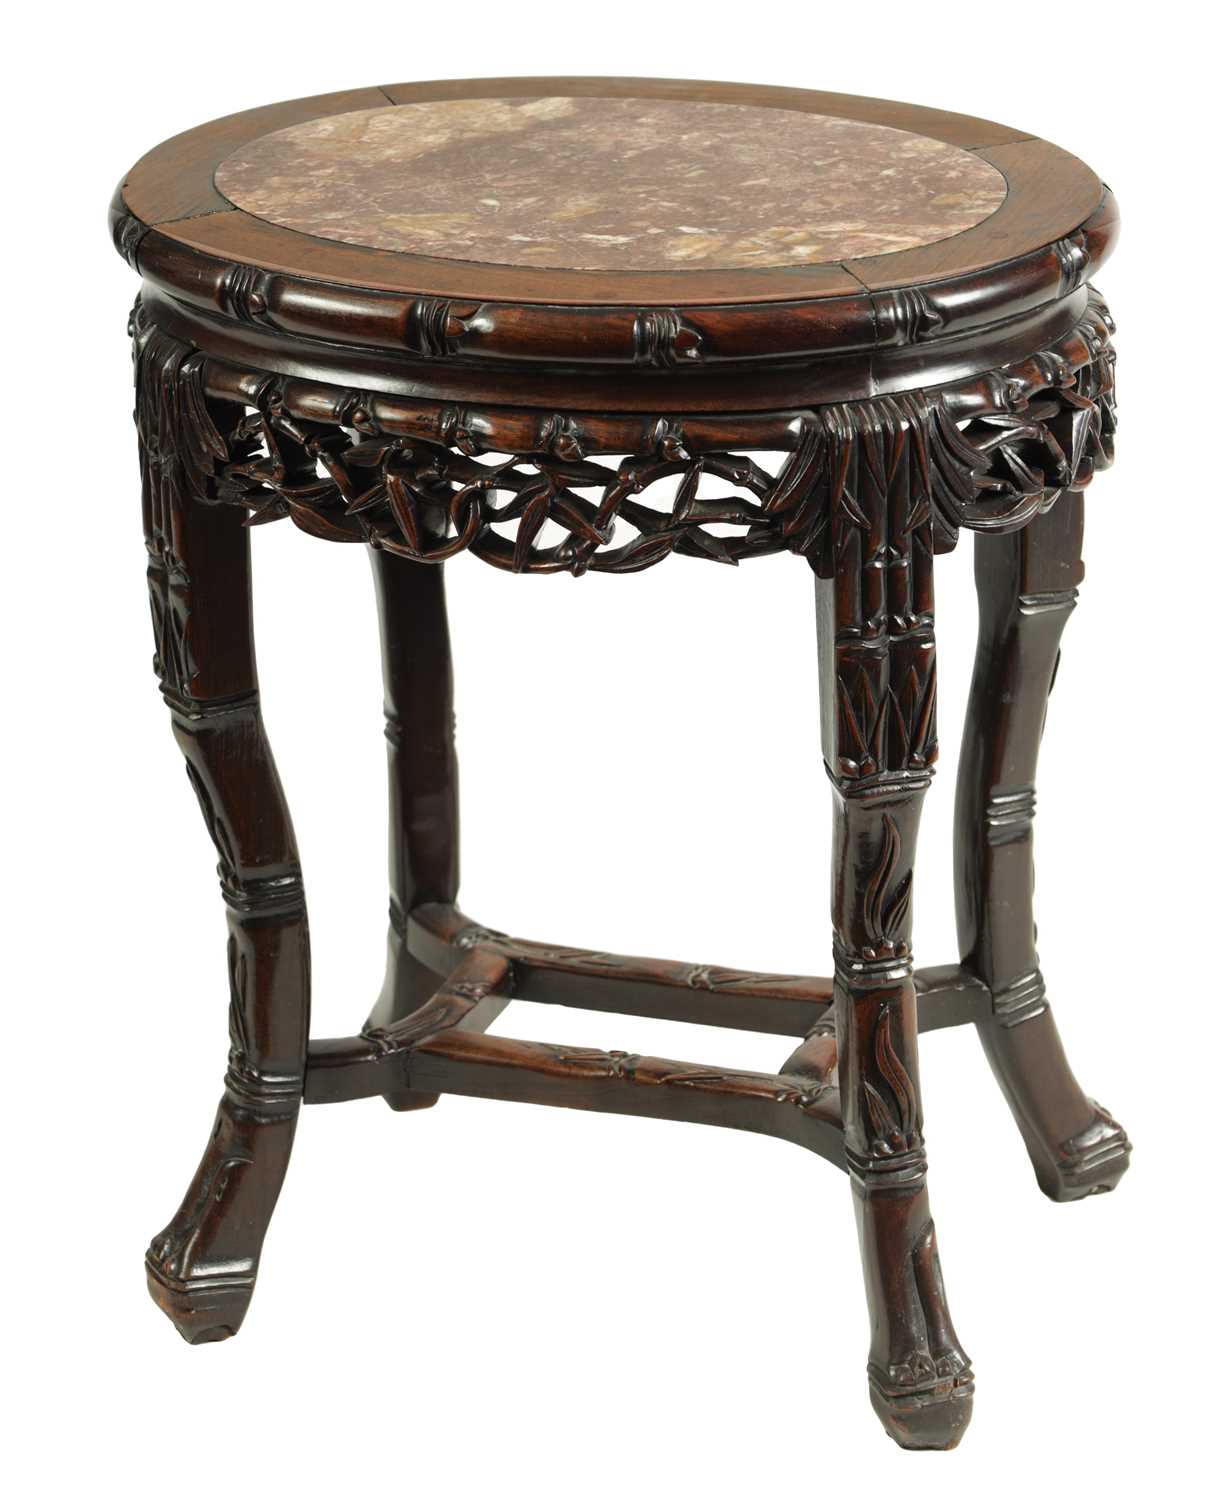 A 19TH CENTURY OVAL CARVED HARDWOOD CHINESE TABLE